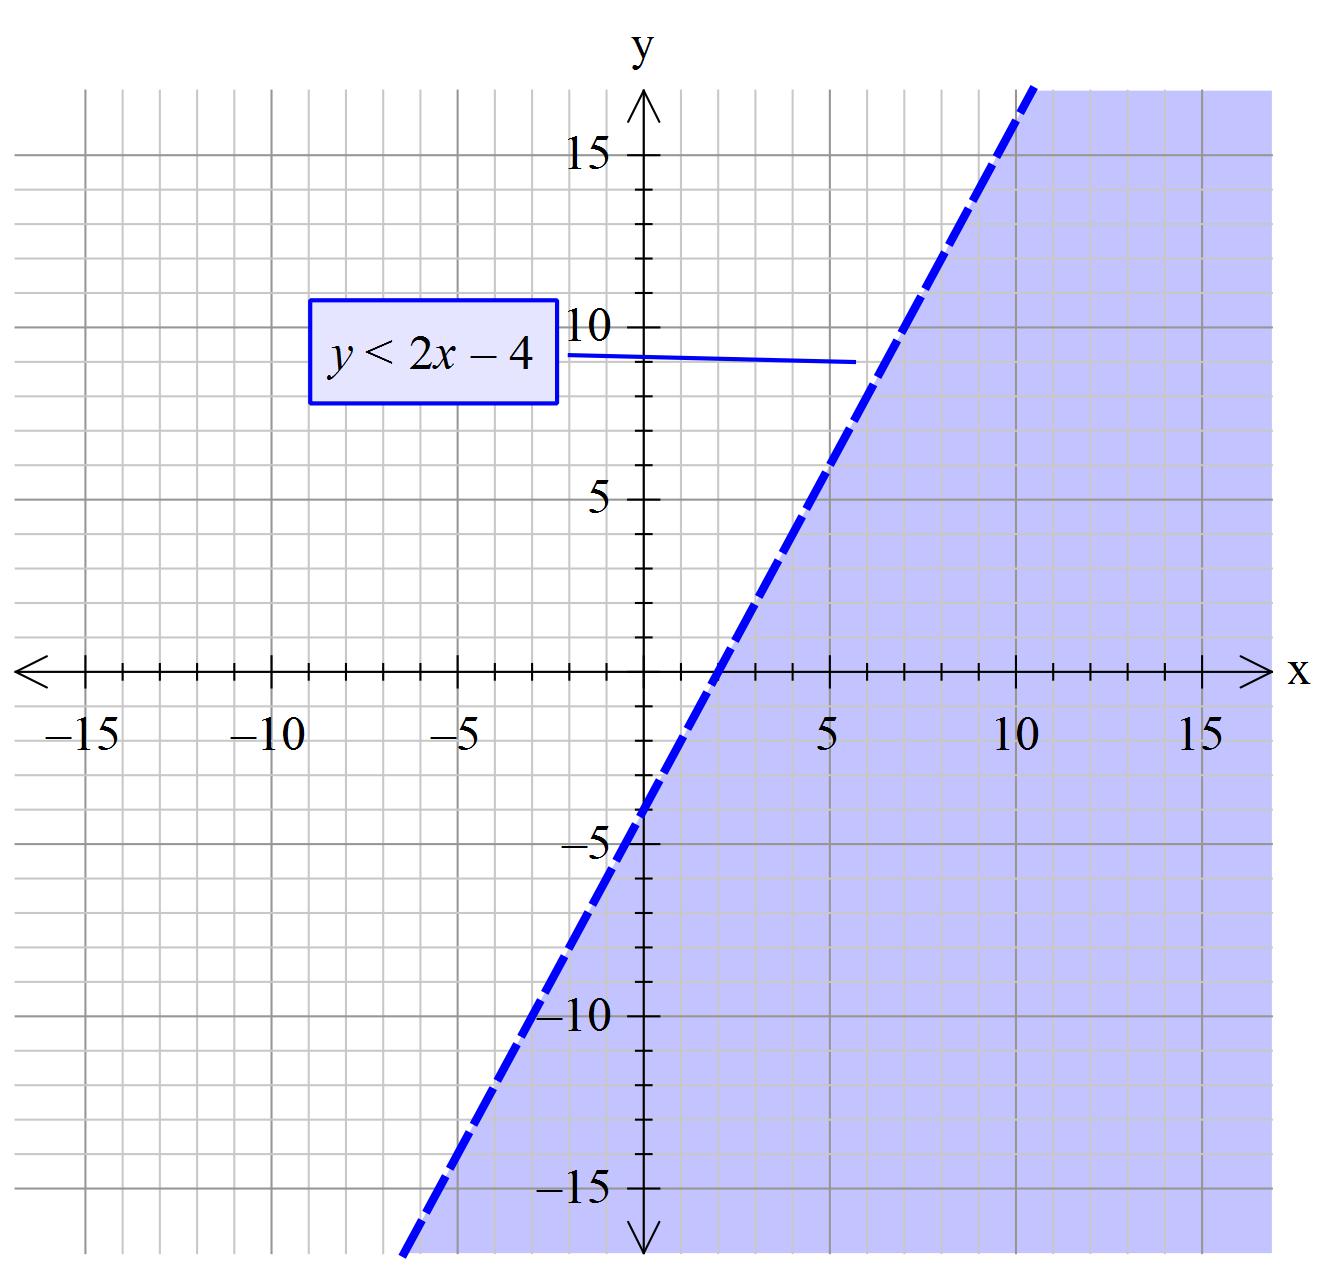 Which quadrants of the xy plane contains points of the graph of 2x-y>4? | Socratic